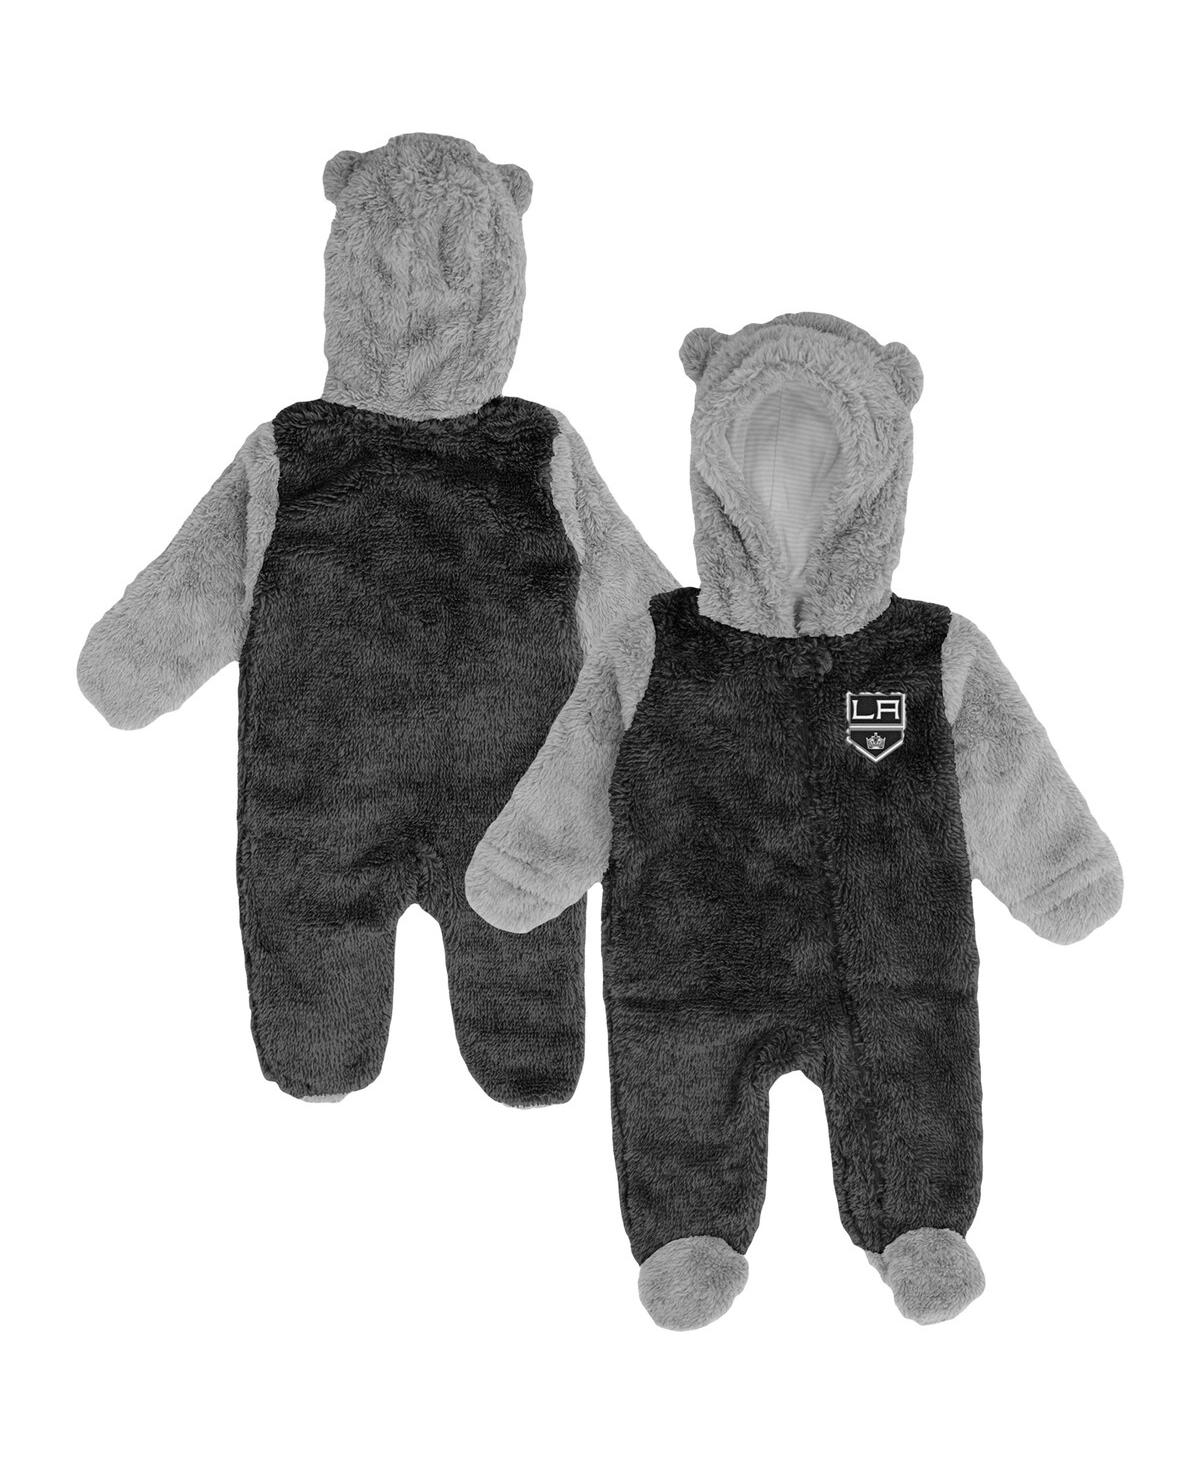 OUTERSTUFF NEWBORN AND INFANT BOYS AND GIRLS BLACK LOS ANGELES KINGS GAME NAP TEDDY FLEECE BUNTING FULL-ZIP SLE